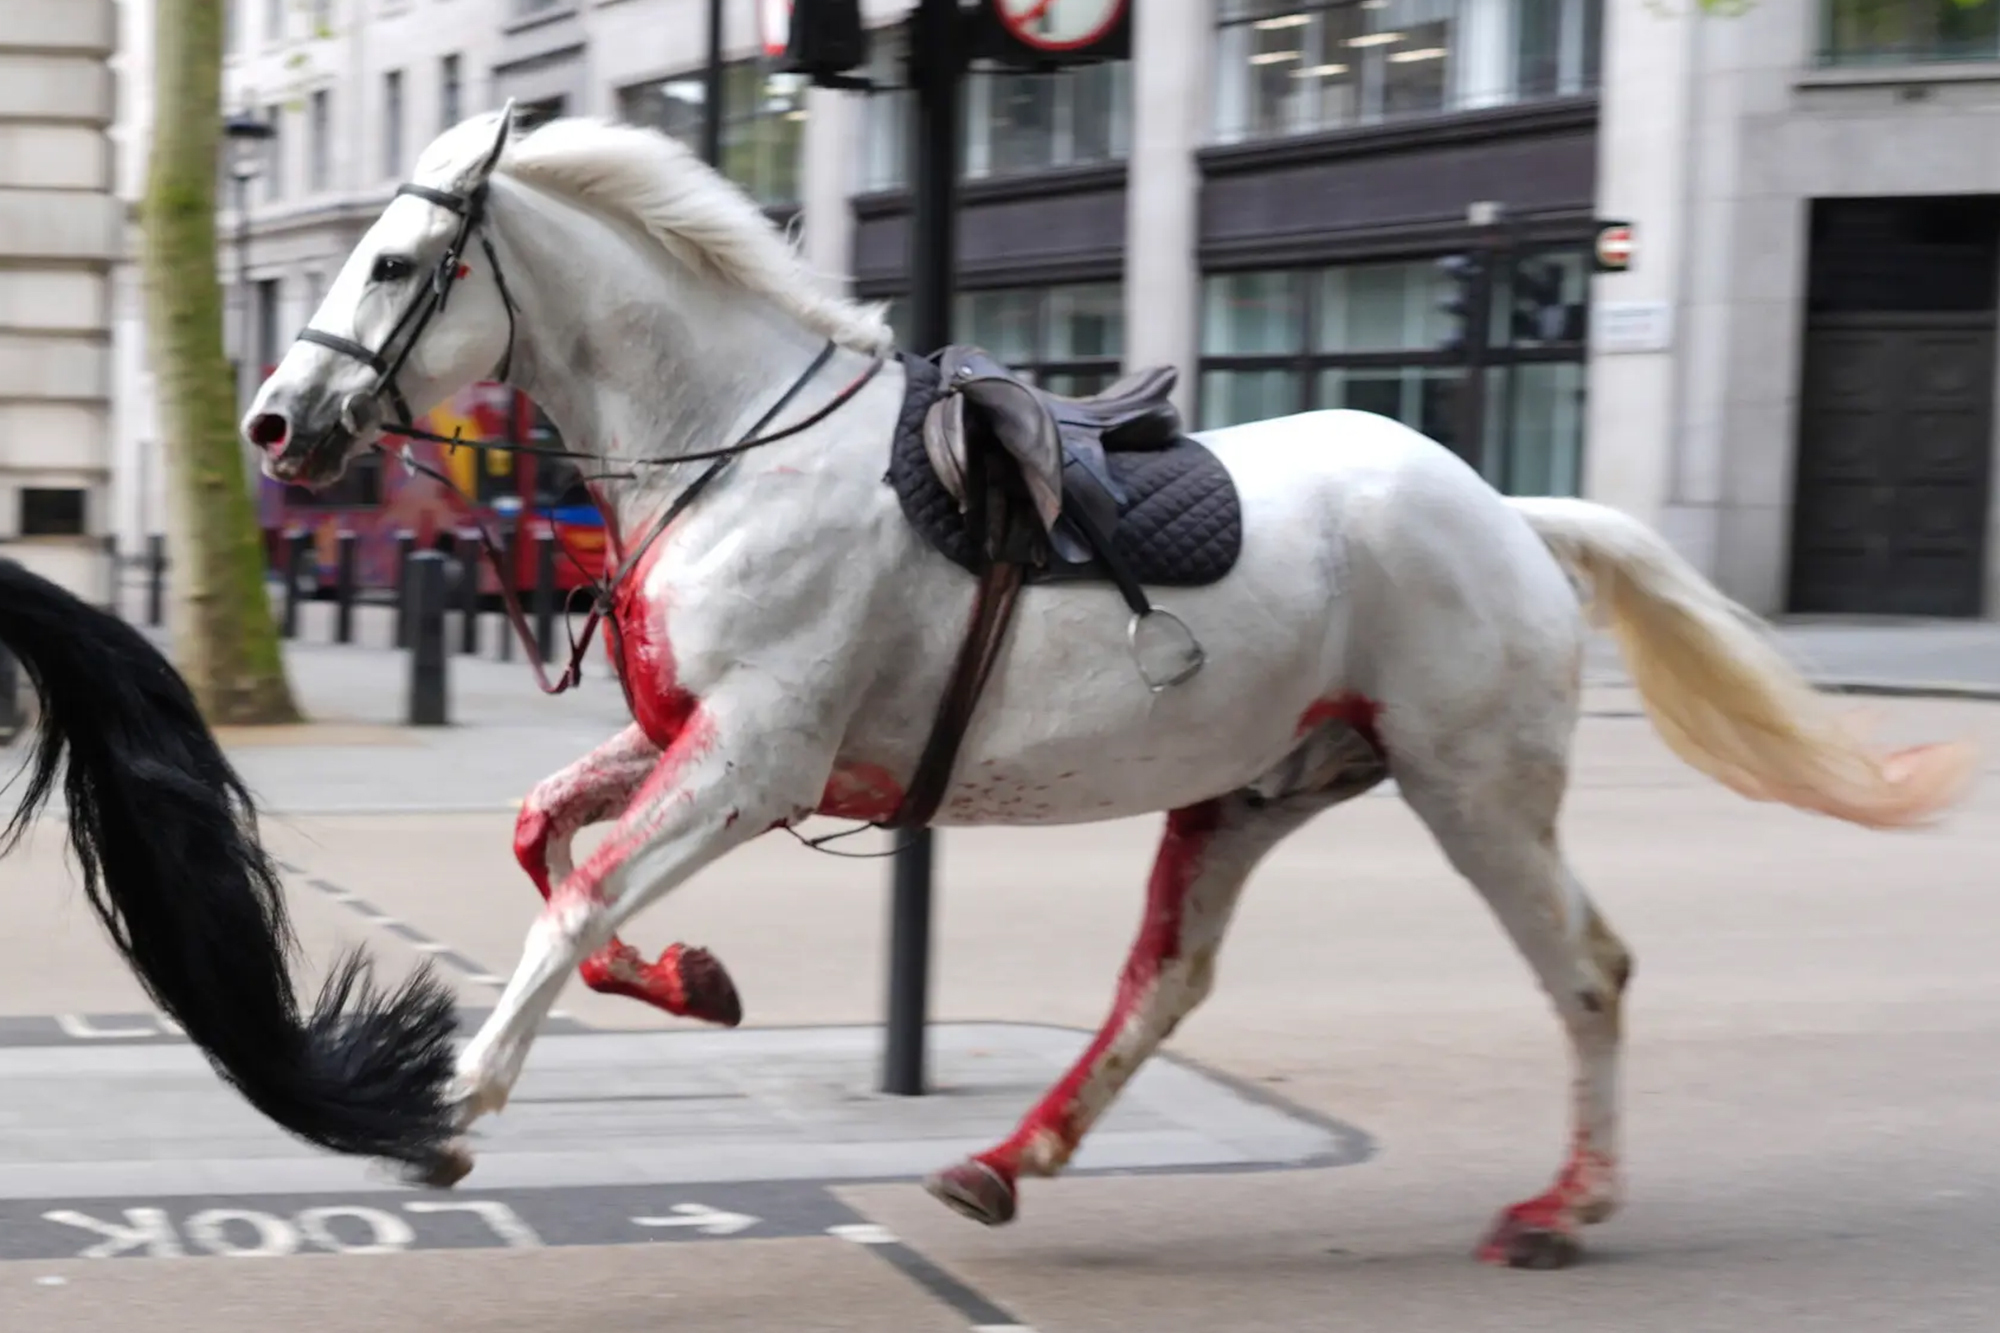 At least five rogue Household Cavalry horses were spotted charging through the heart of the UK capital.